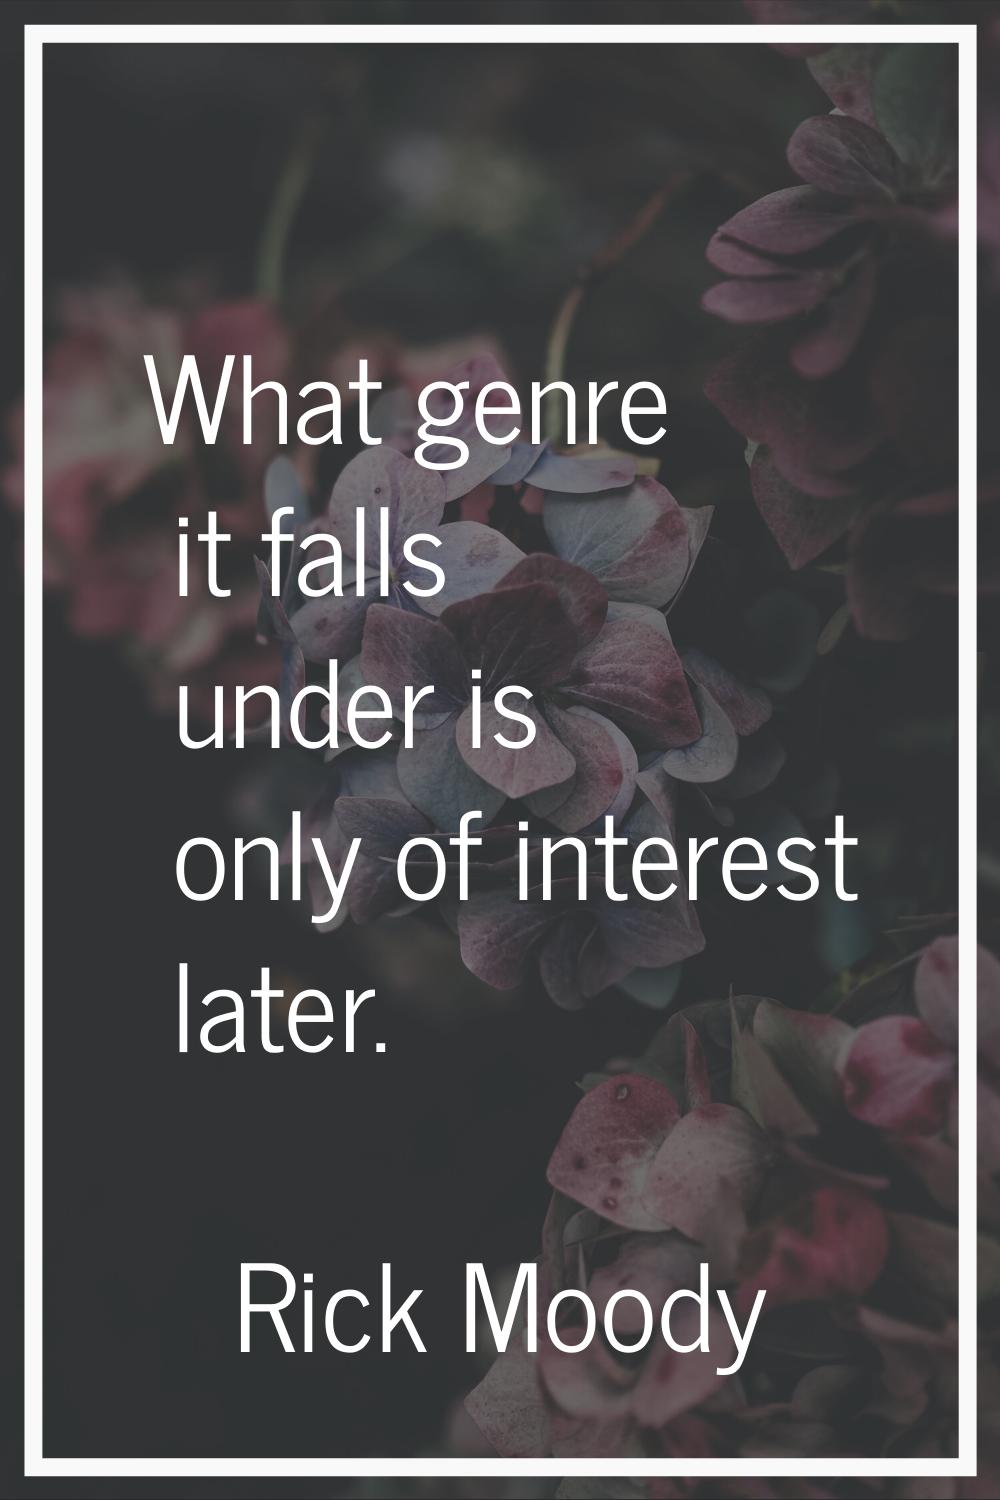 What genre it falls under is only of interest later.